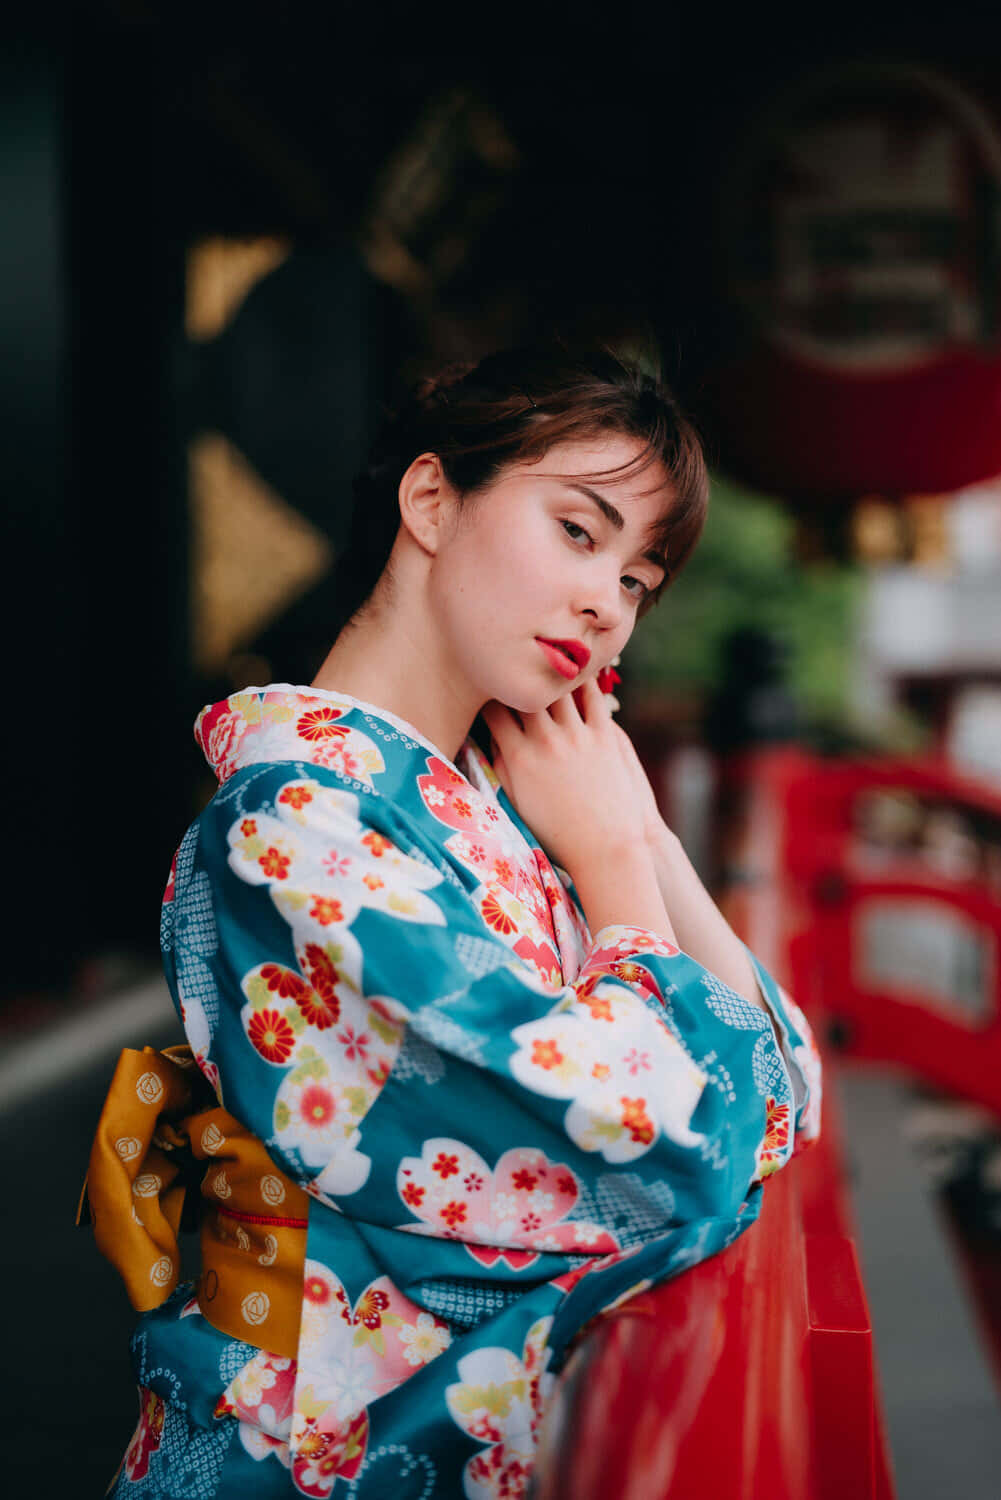 A beautiful kimono patterned in shades of red, yellow, and blue.